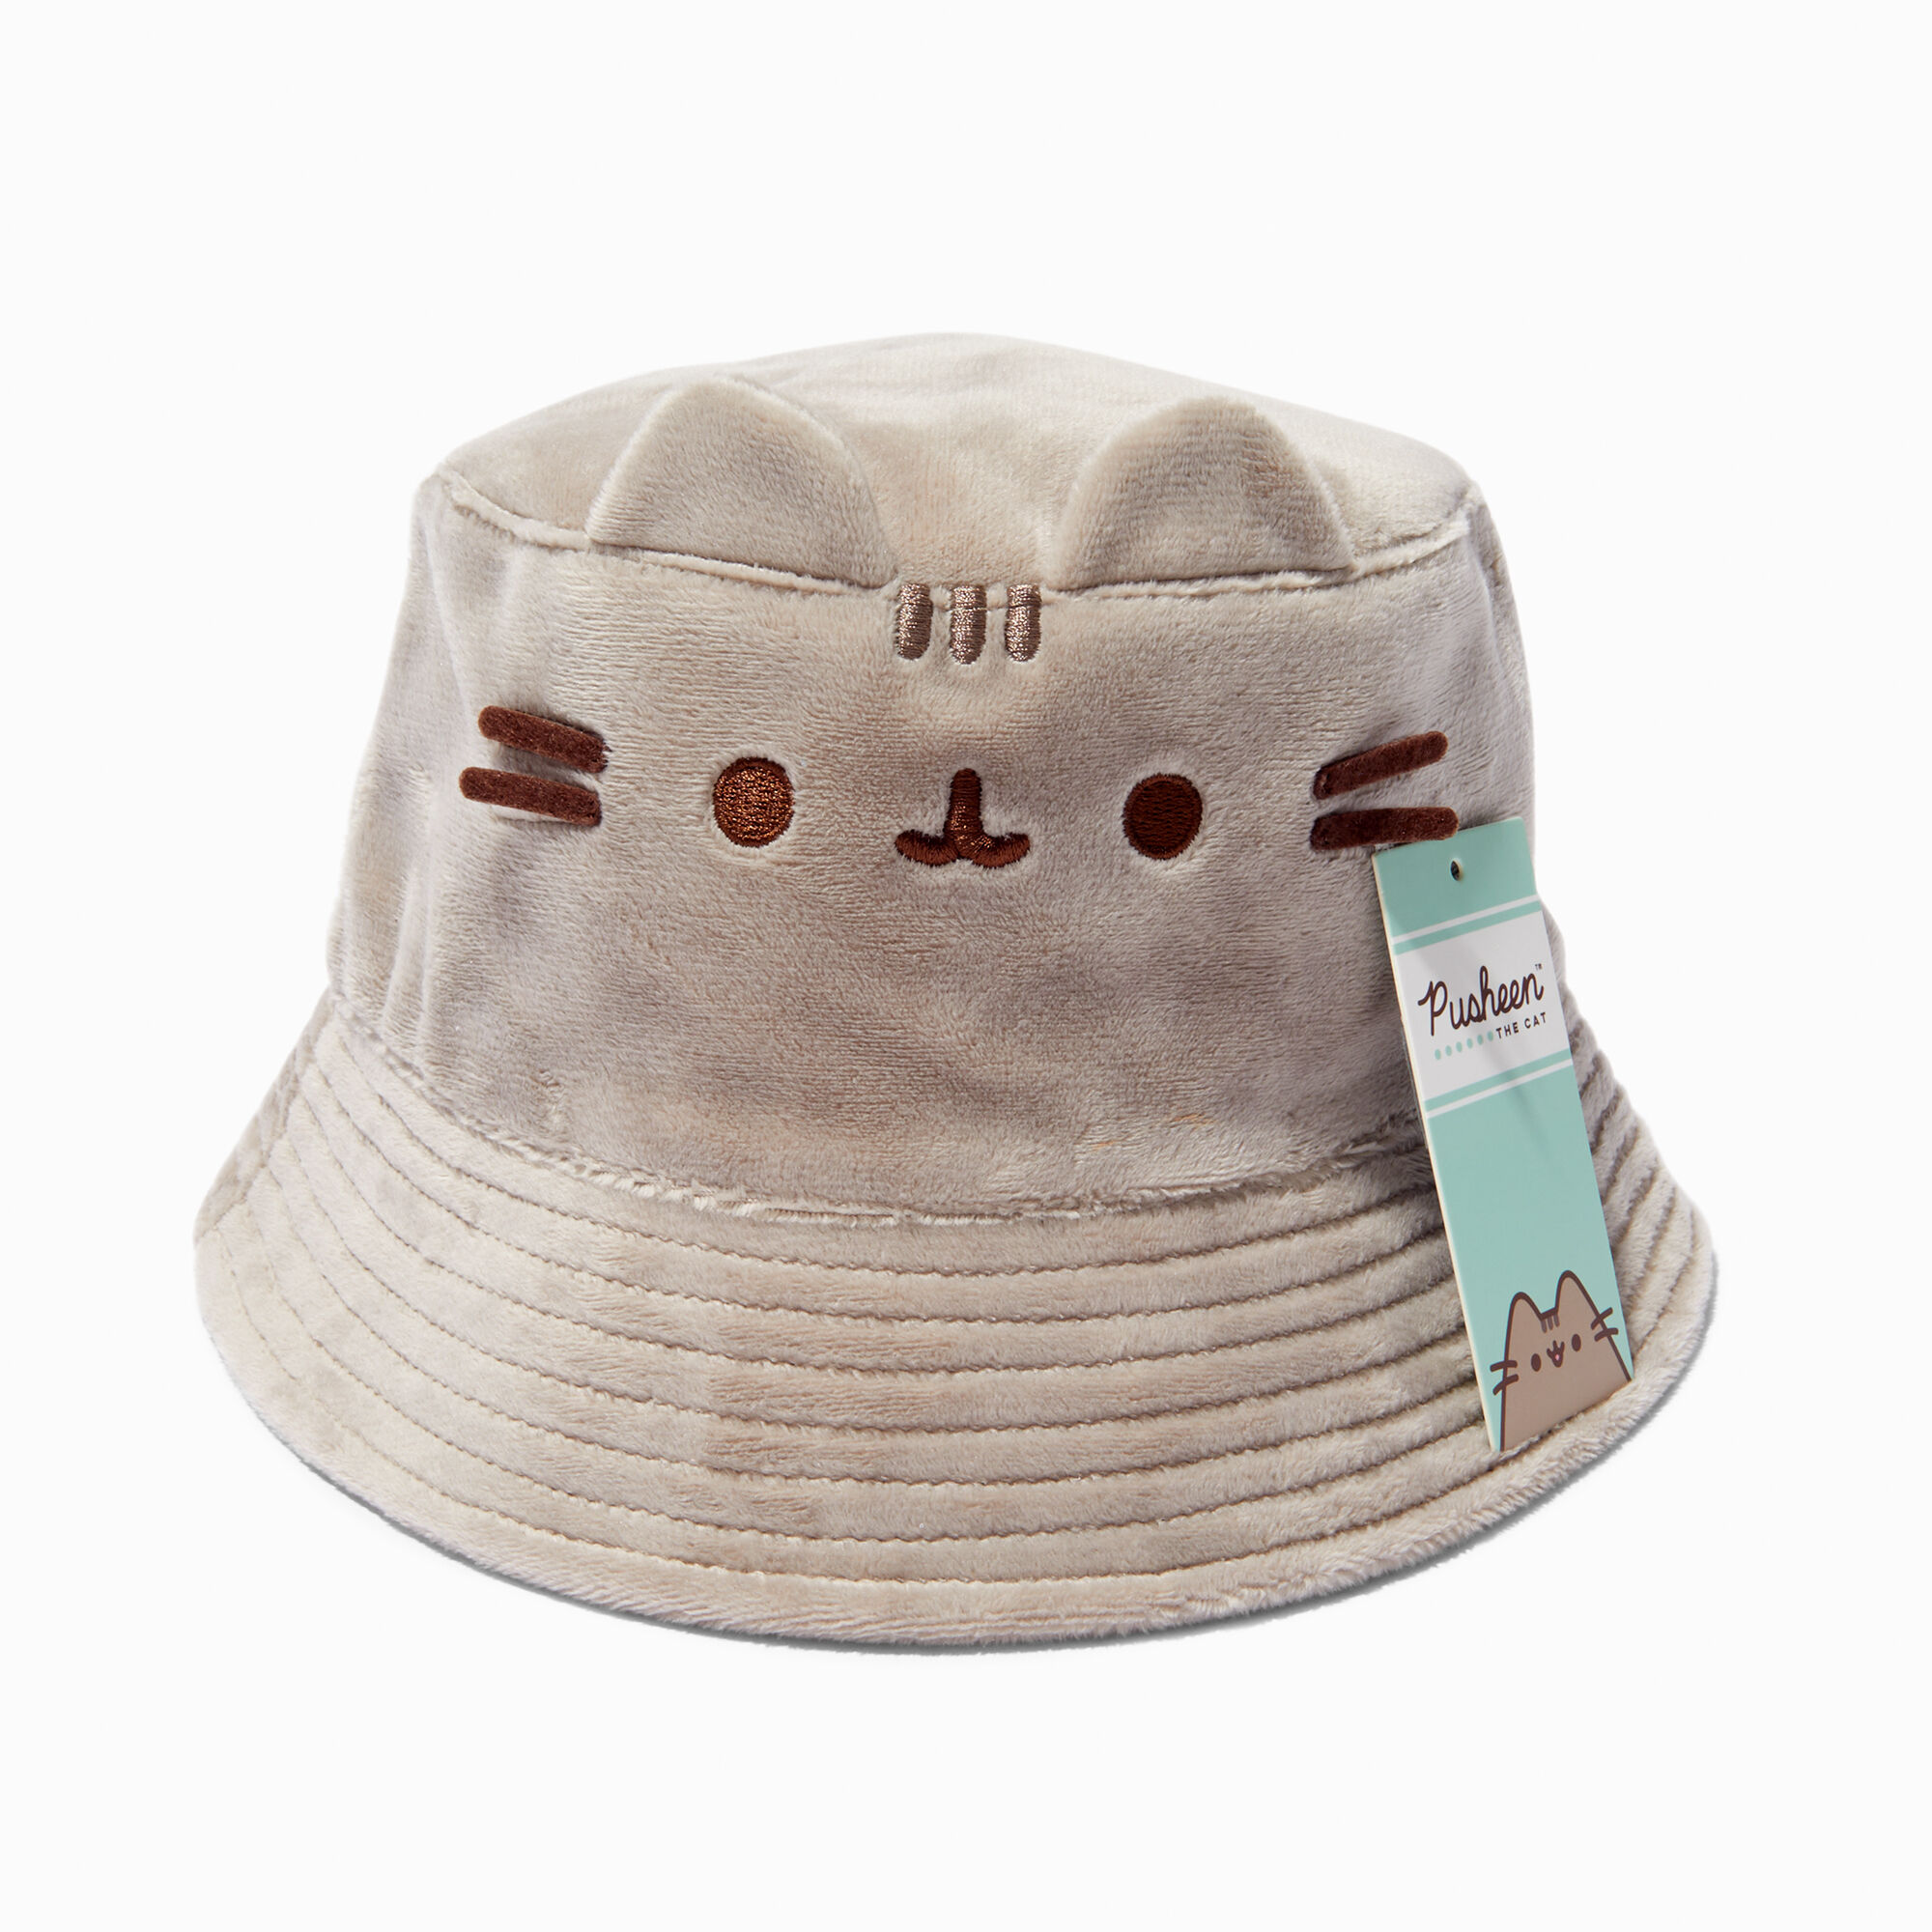 View Claires Pusheen Bucket Hat With Cat Ears information